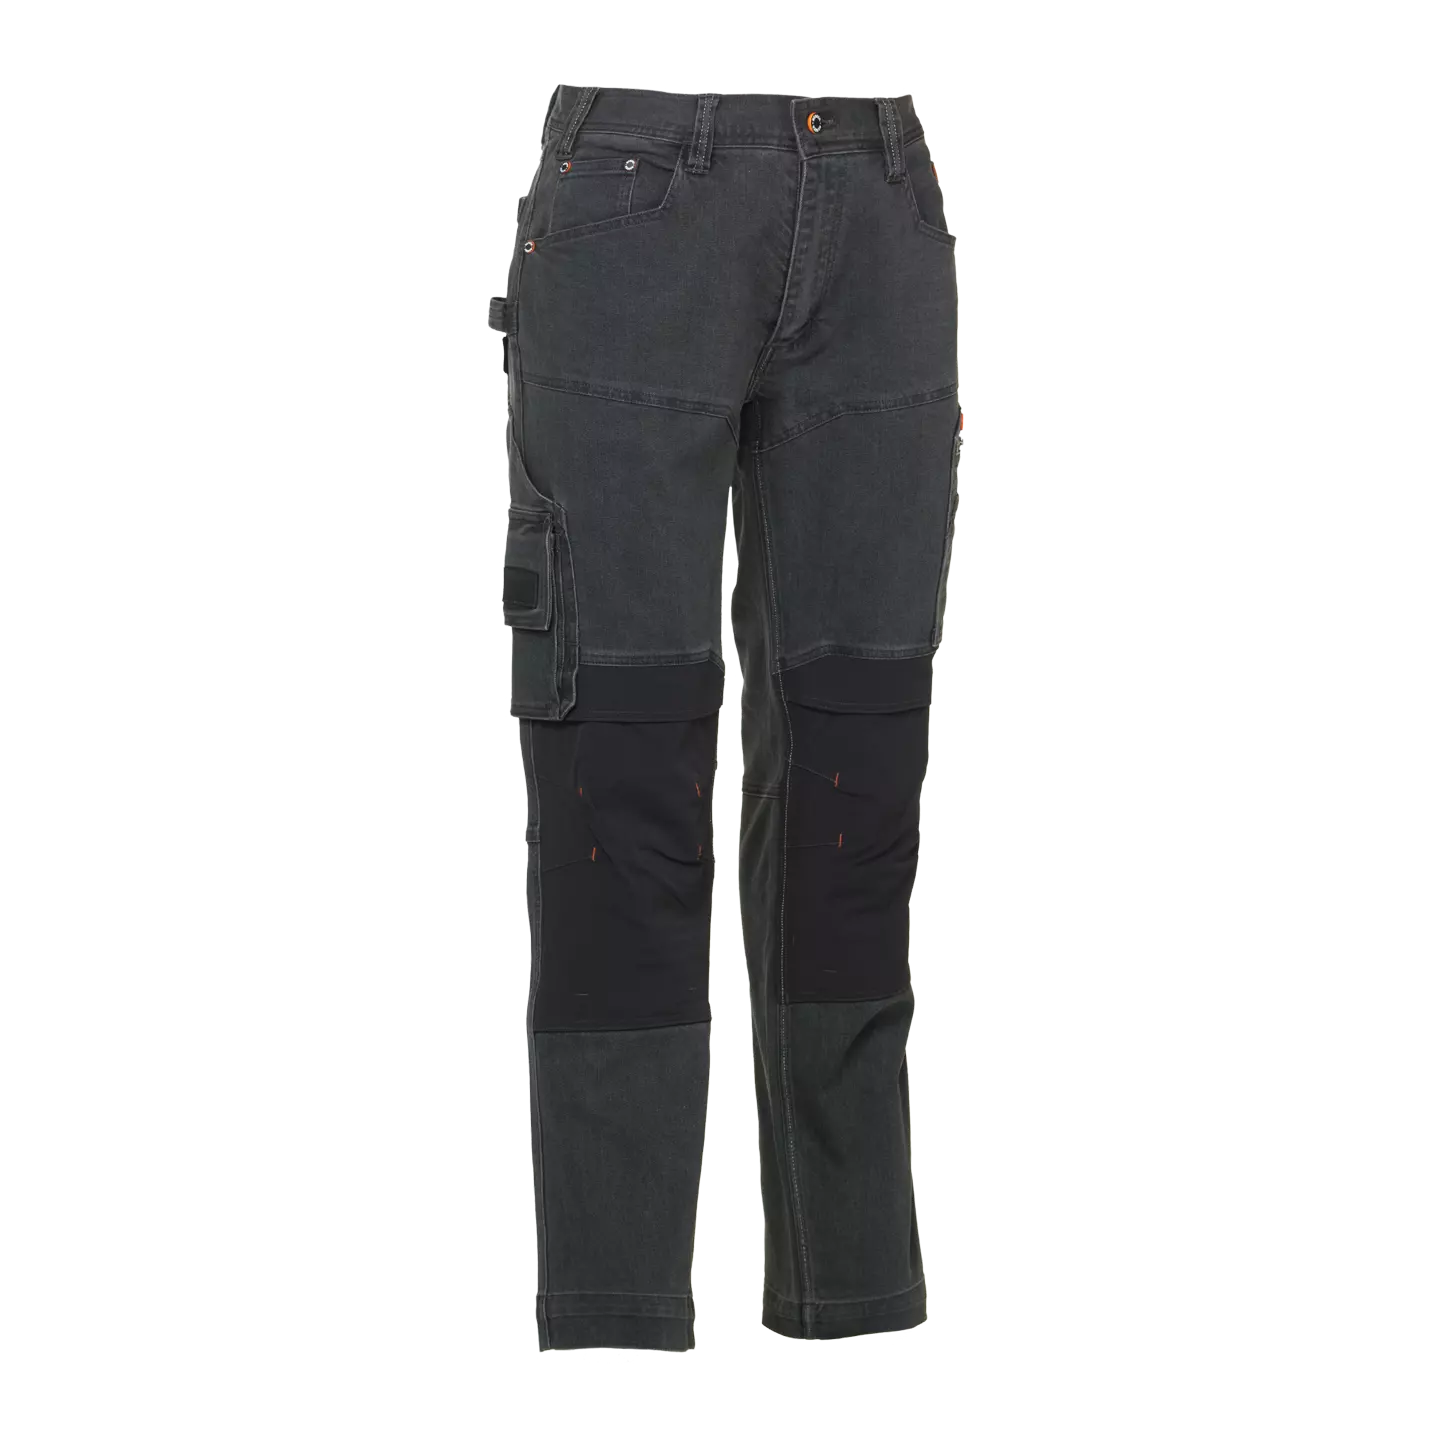 Sphinx Trousers Grey Jeans 40